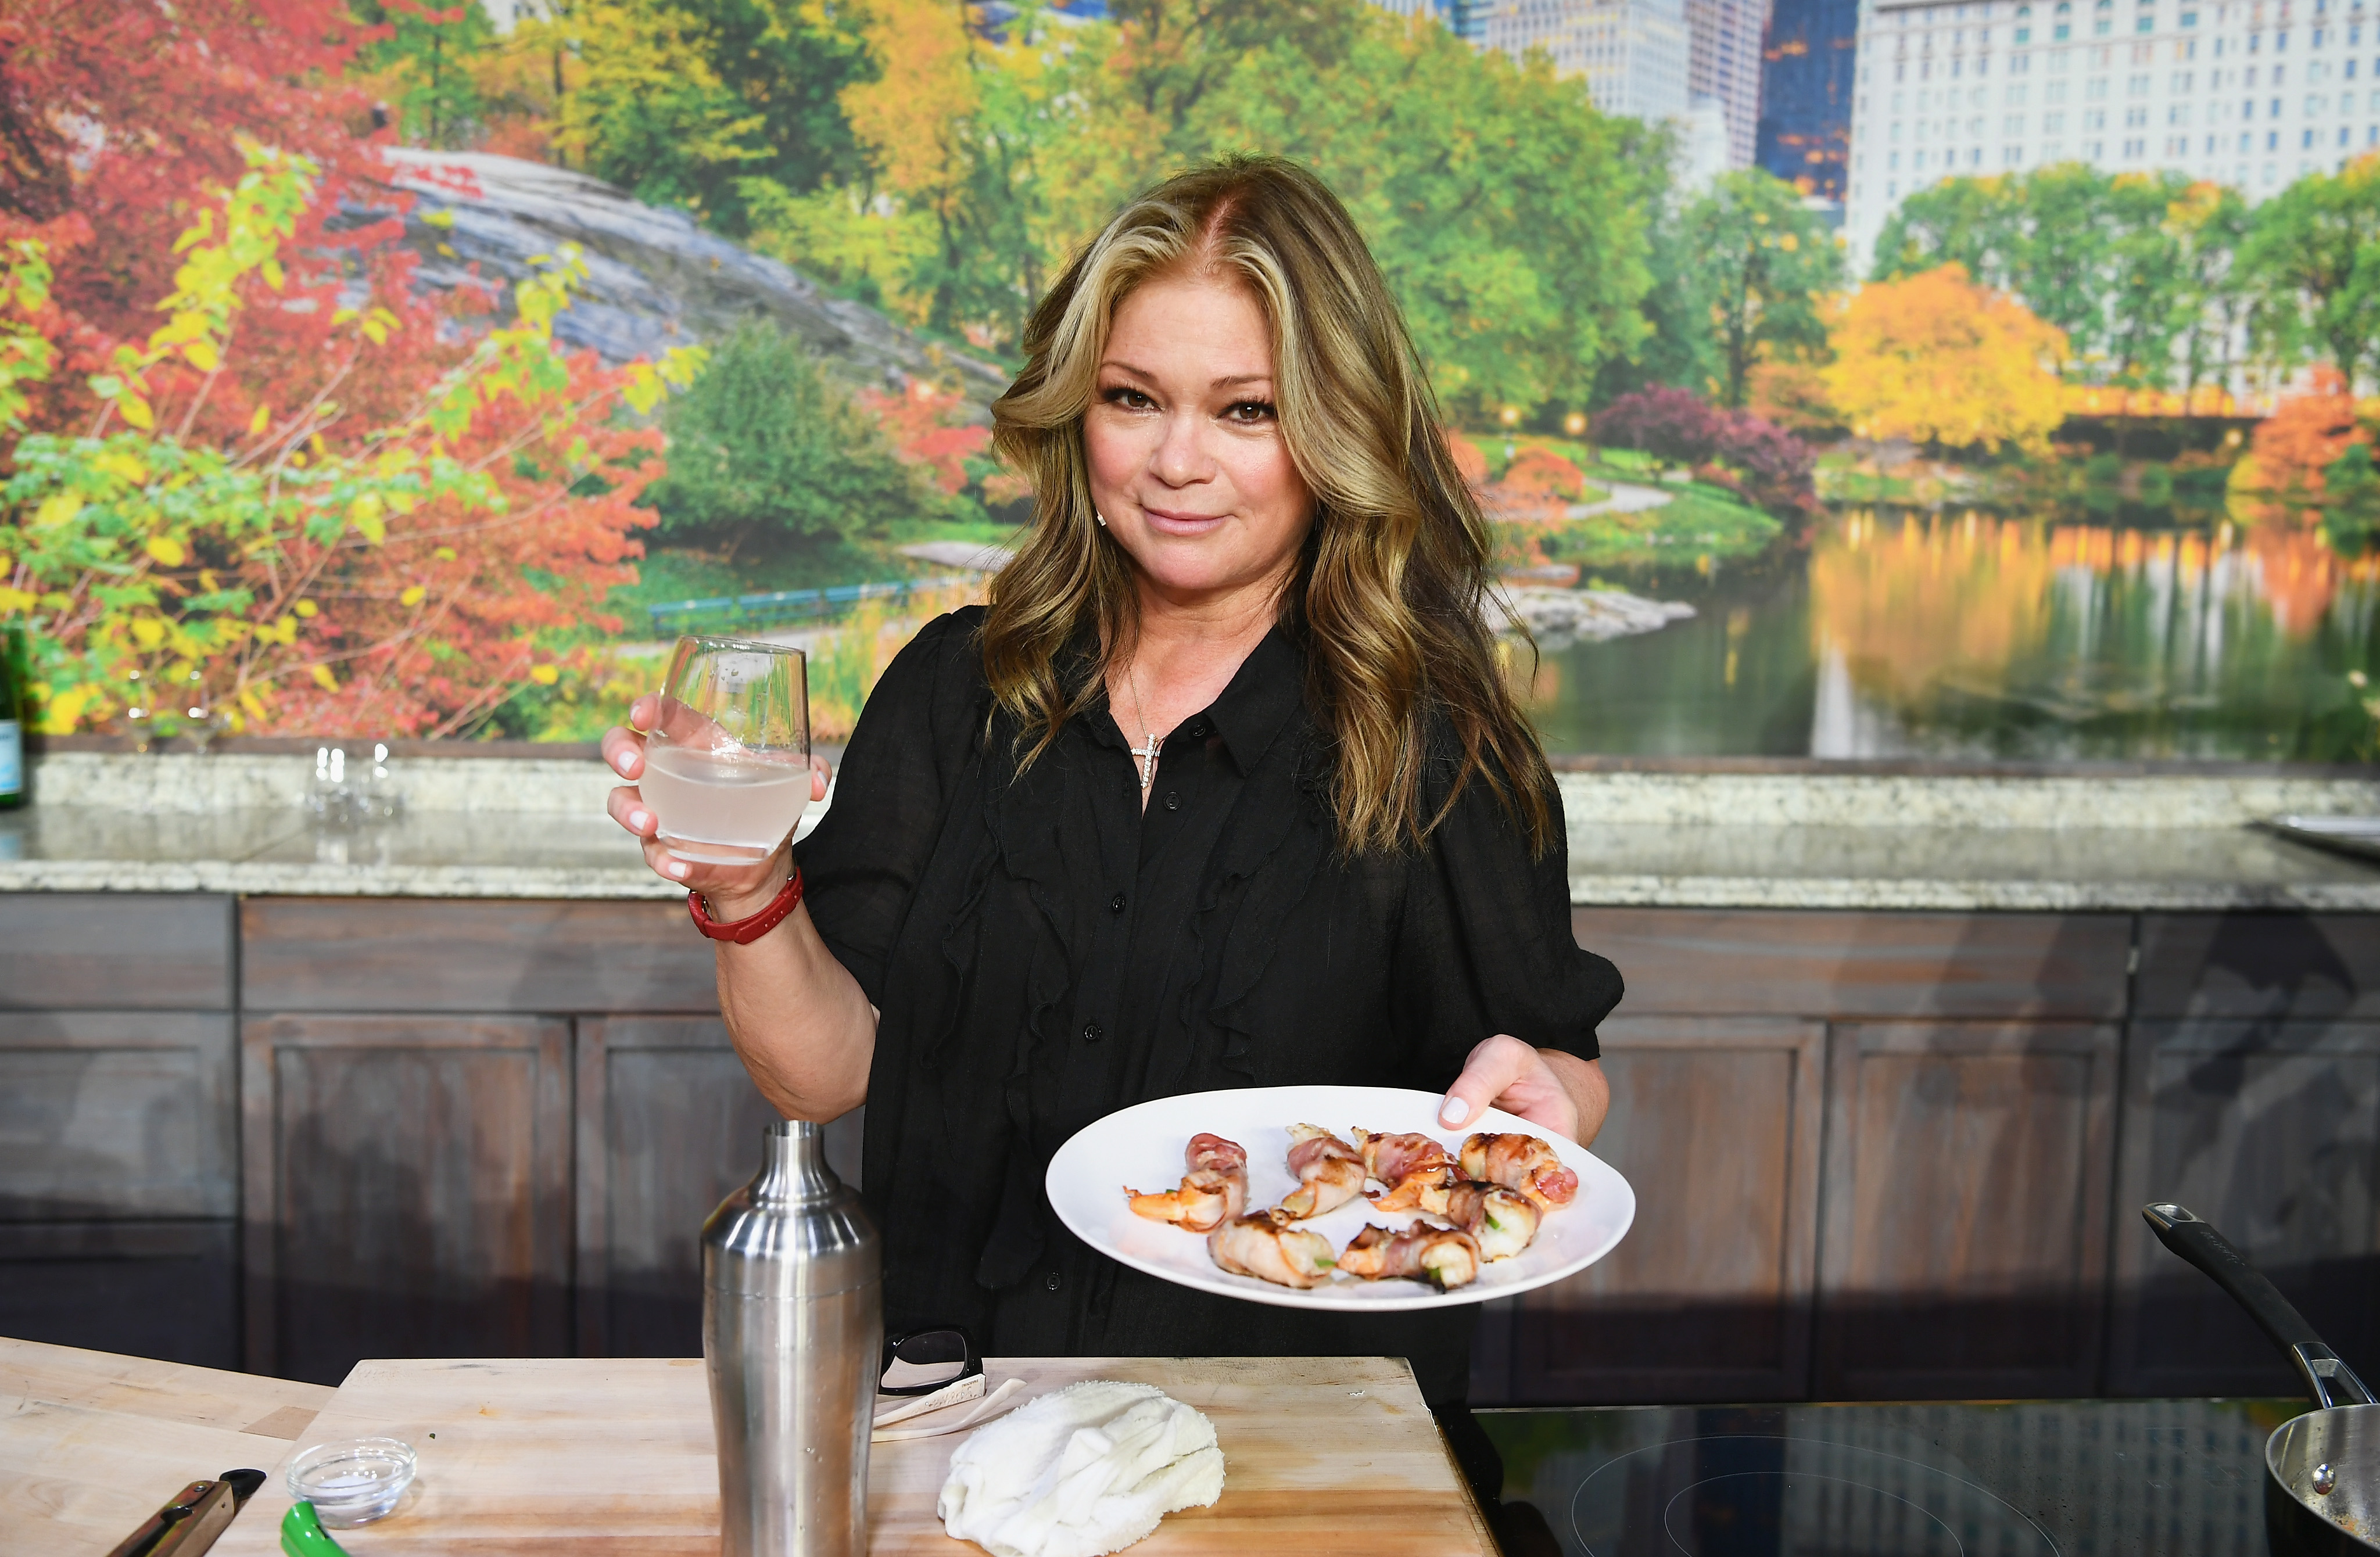 Food Network star Valerie Bertinelli poses with a drink in one hand and a dished plate in the other.